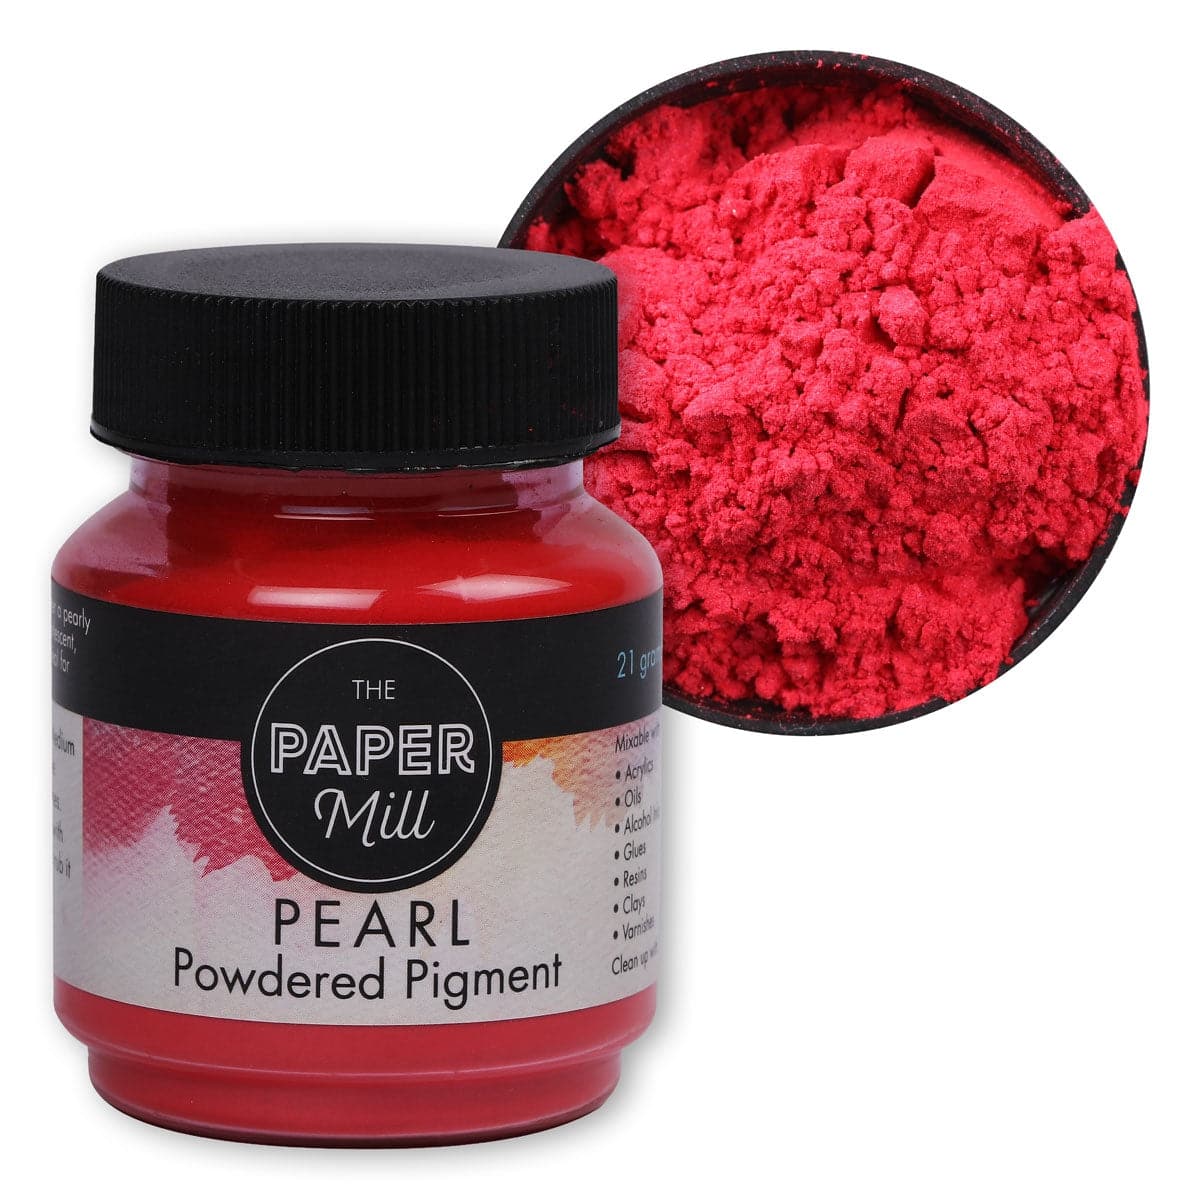 Image of The Paper Mill Pearl Powdered Pigment Magenta 21g